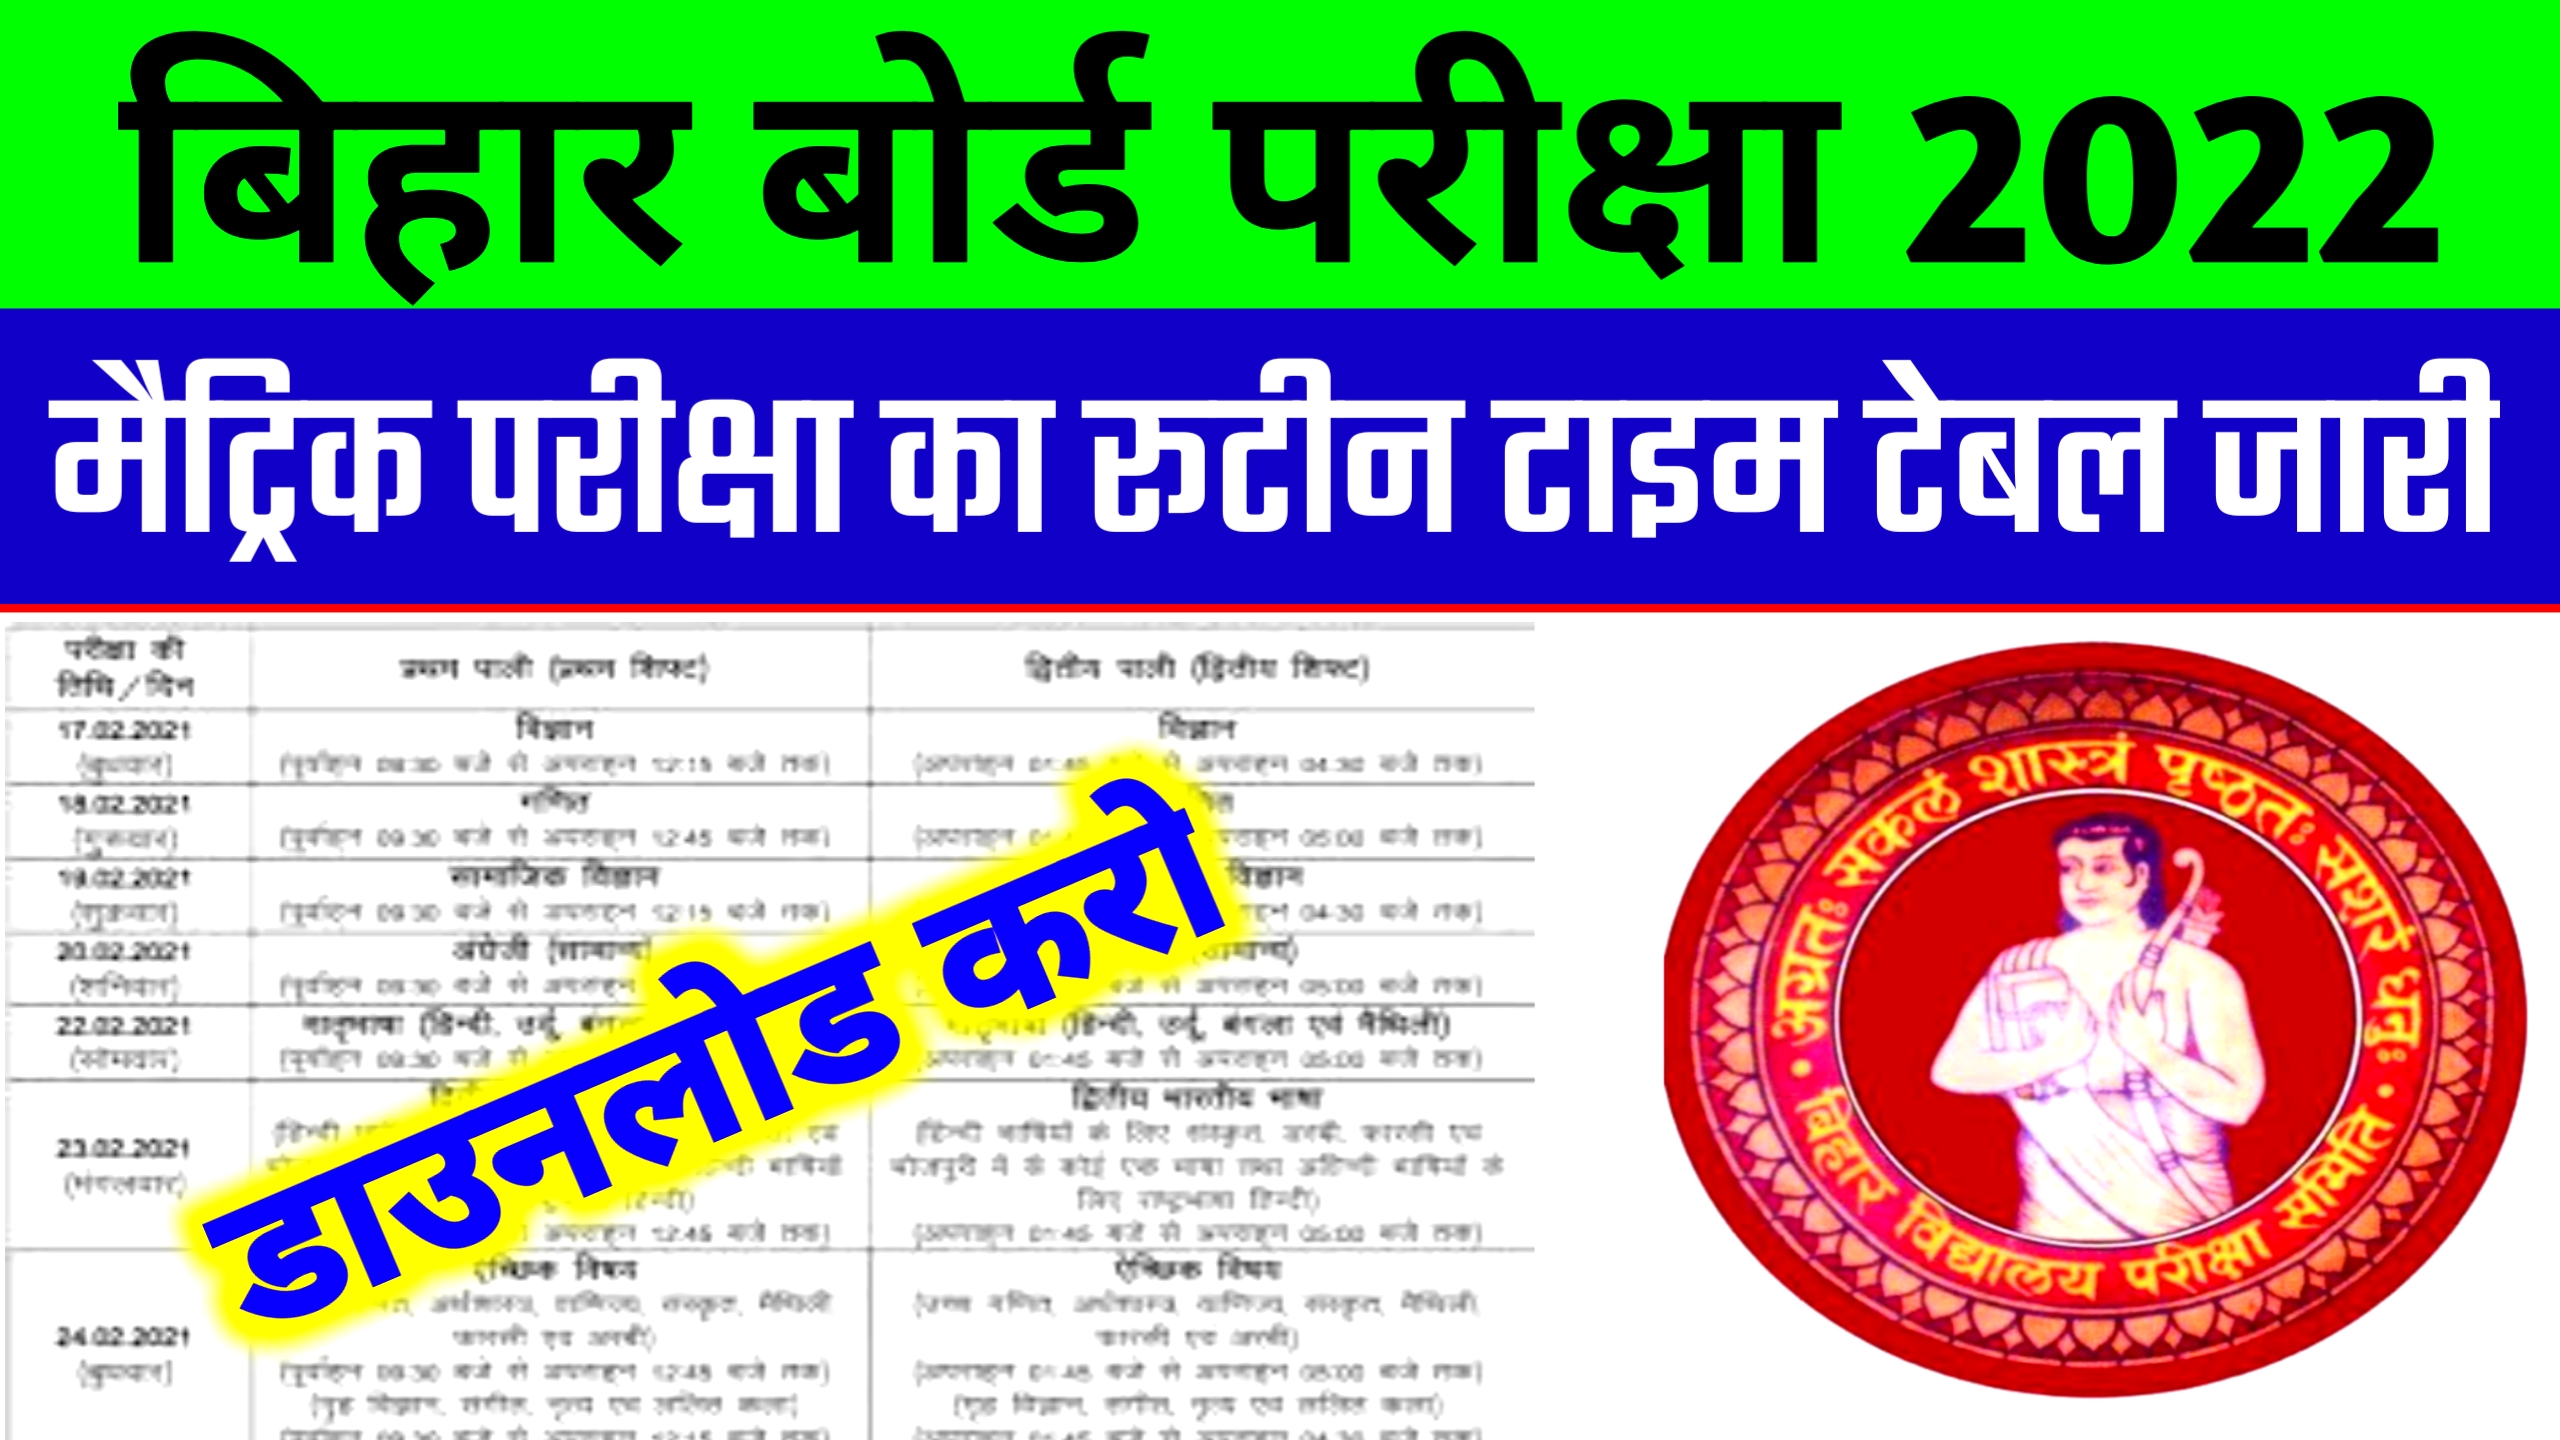 Bihar Board 10th Exam Date 2022 अभी अभी हुआ जारी : Bseb Matric Exam Date 2022 & Time Table Out